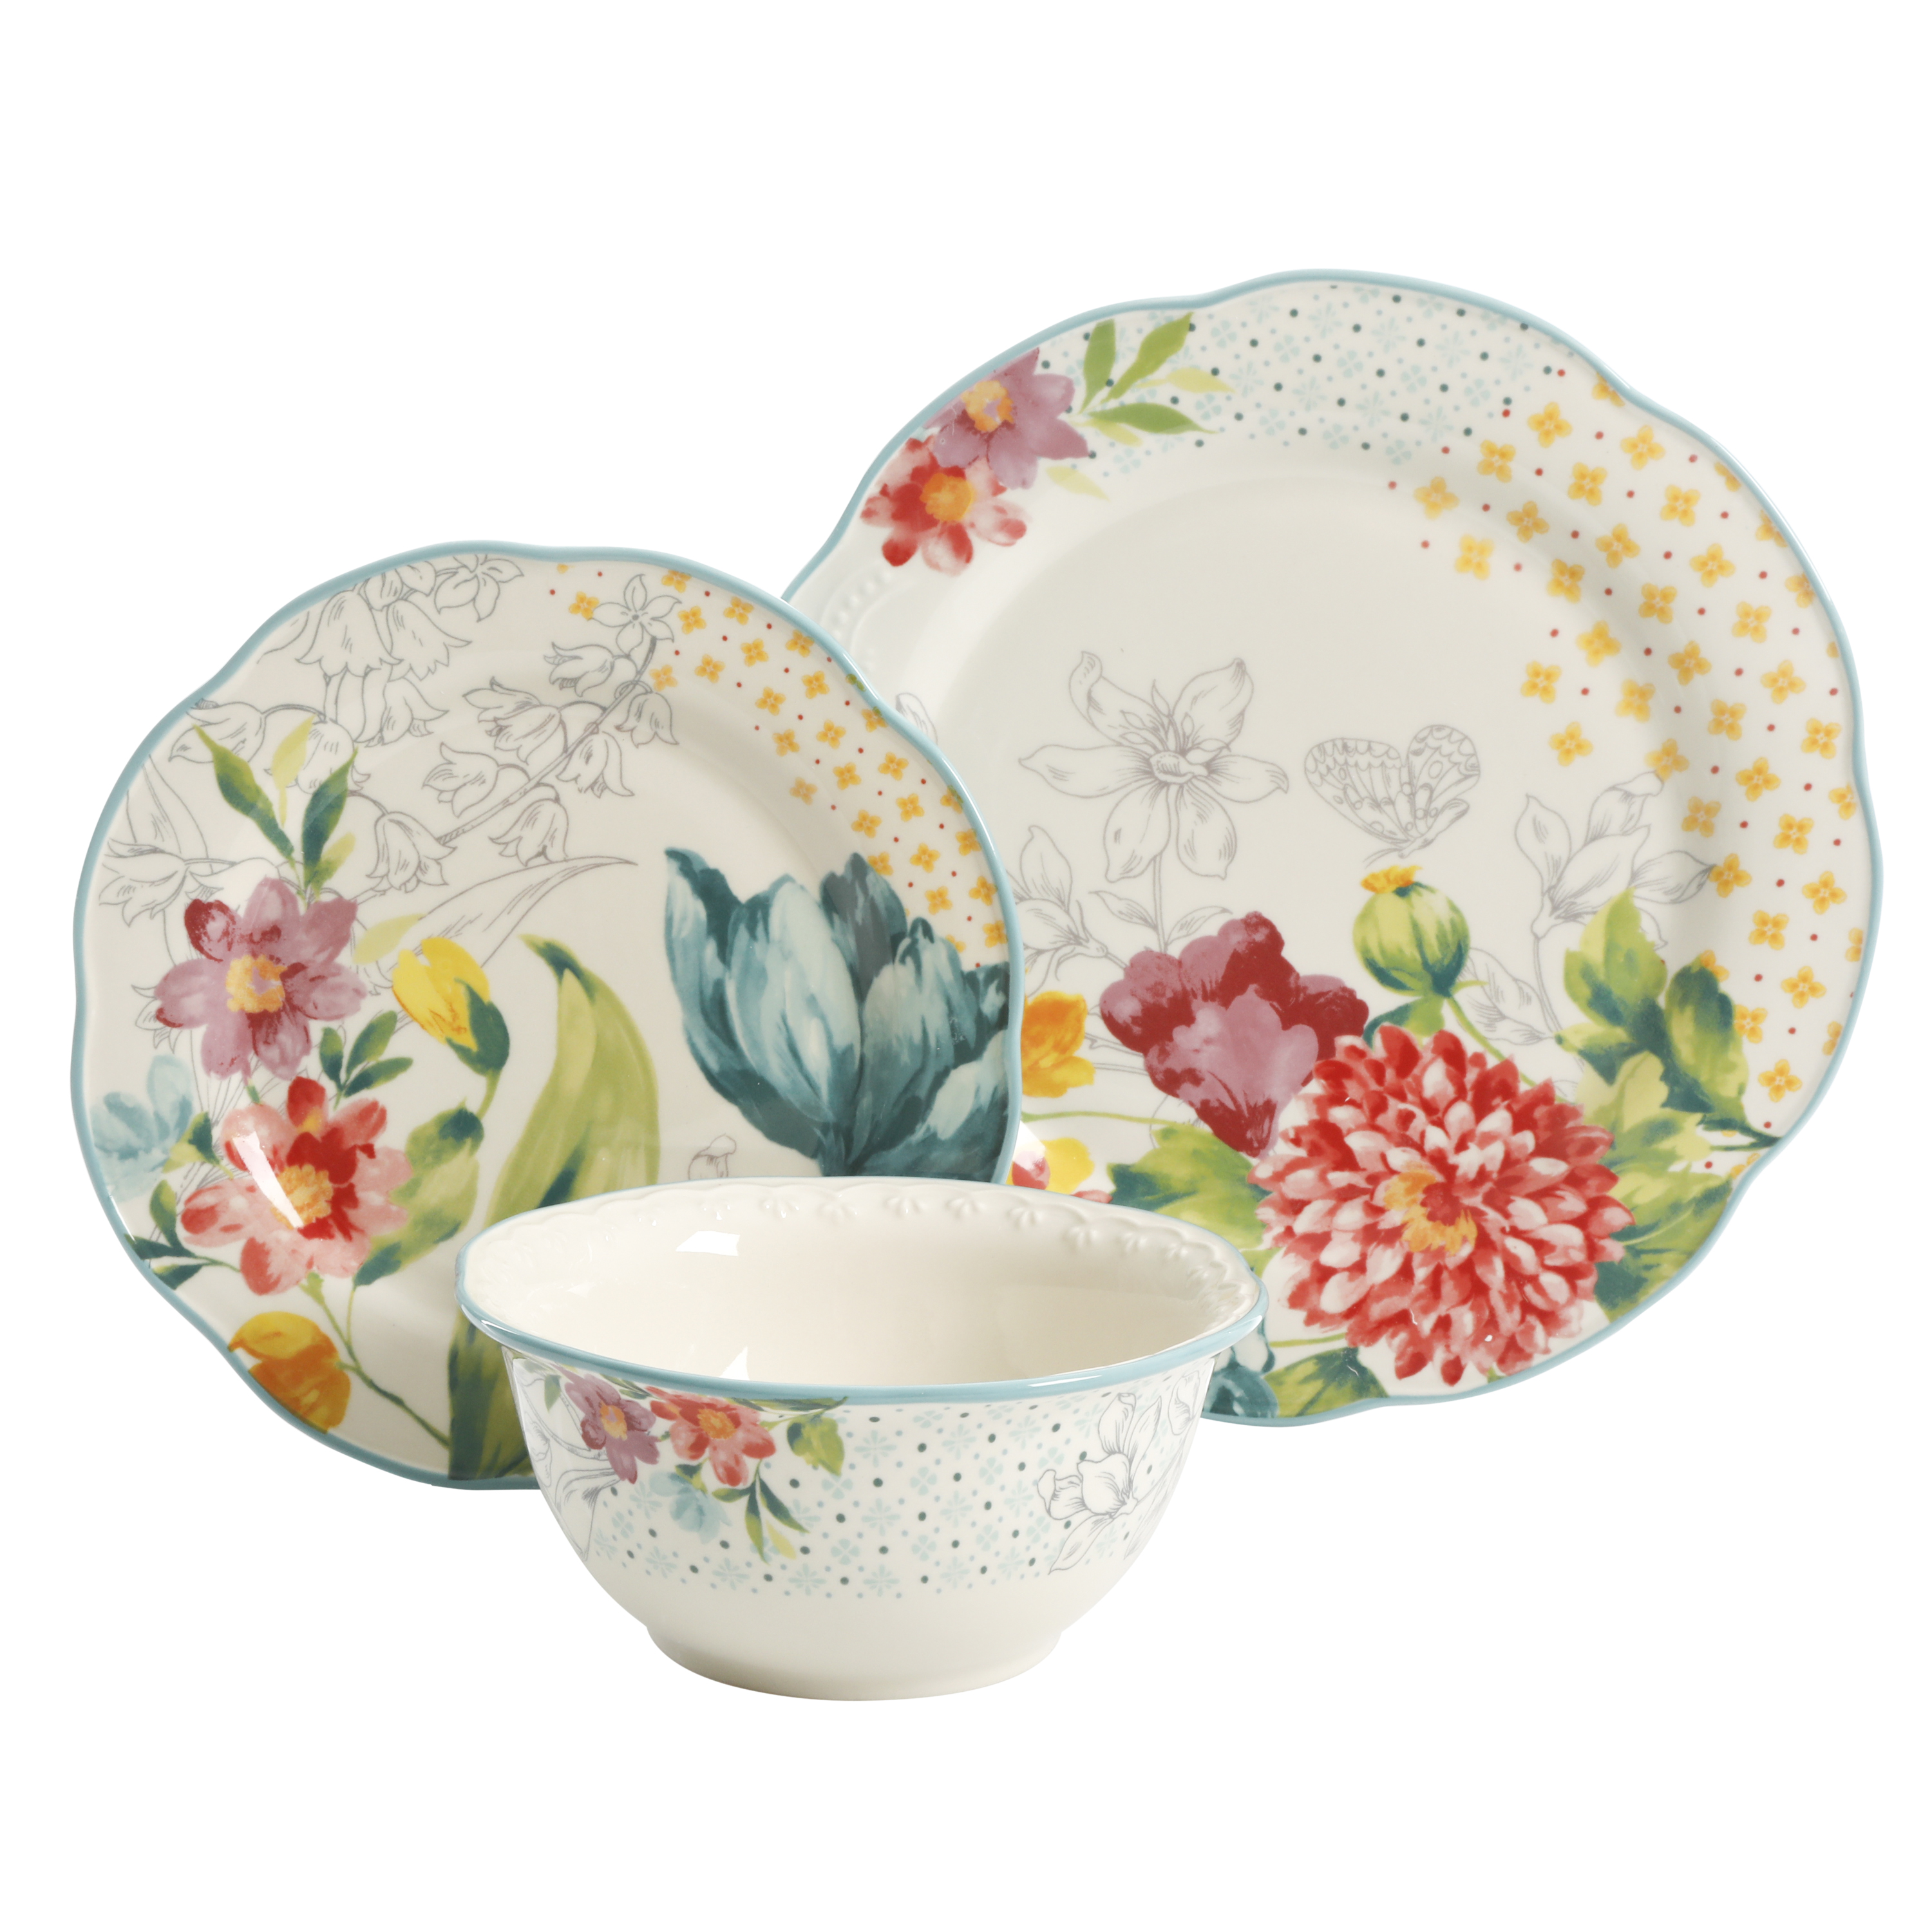 The Pioneer Woman Blooming Bouquet White Ceramic 12-Piece Dinnerware Set - image 3 of 7